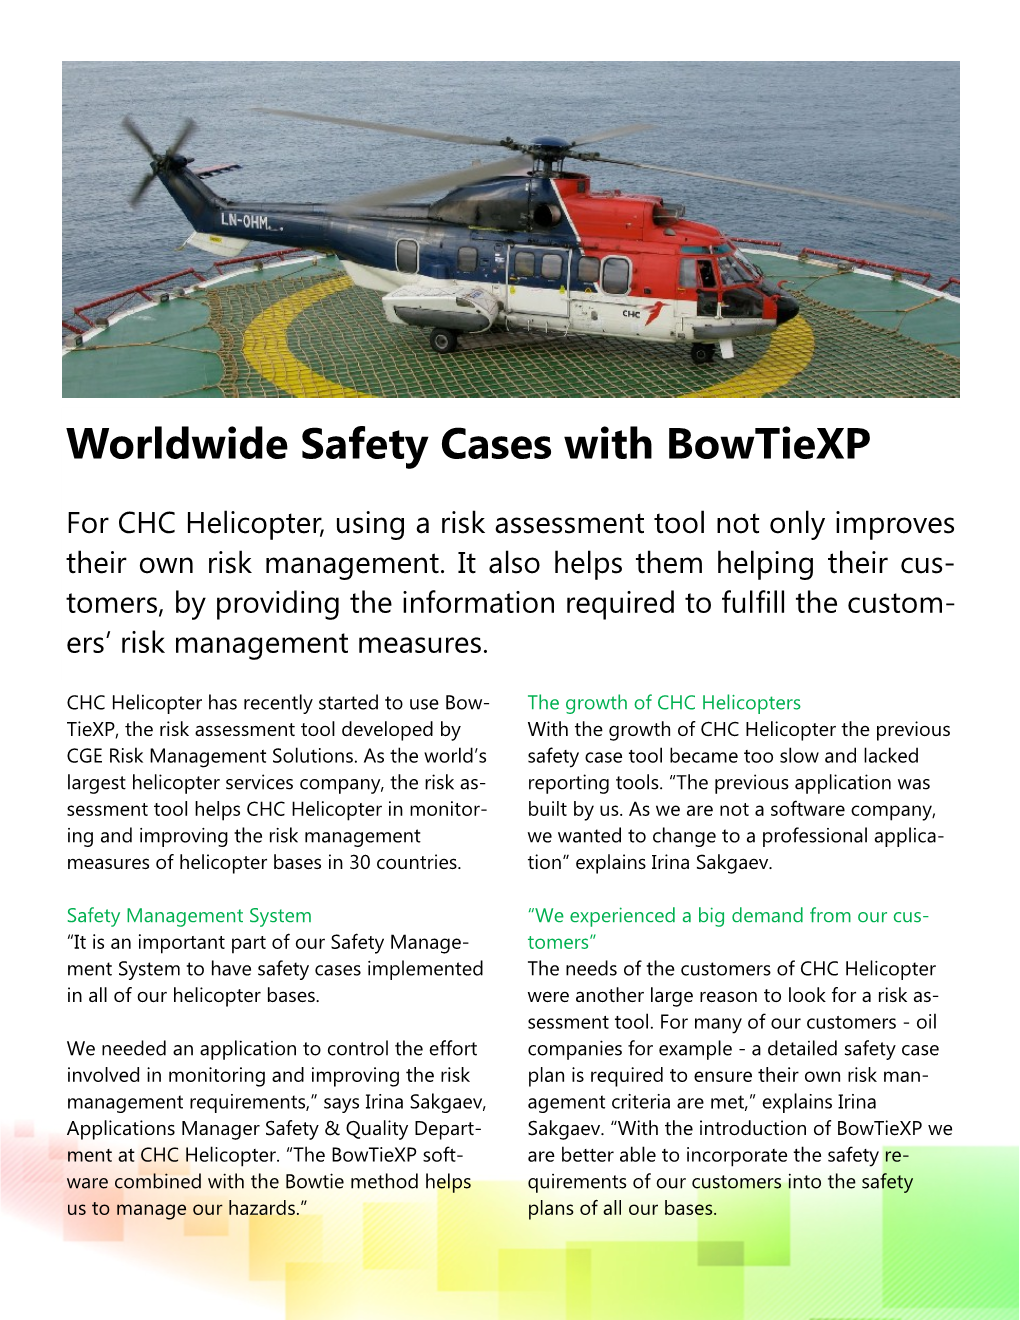 CHC Helicopter, Using a Risk Assessment Tool Not Only Improves Their Own Risk Management